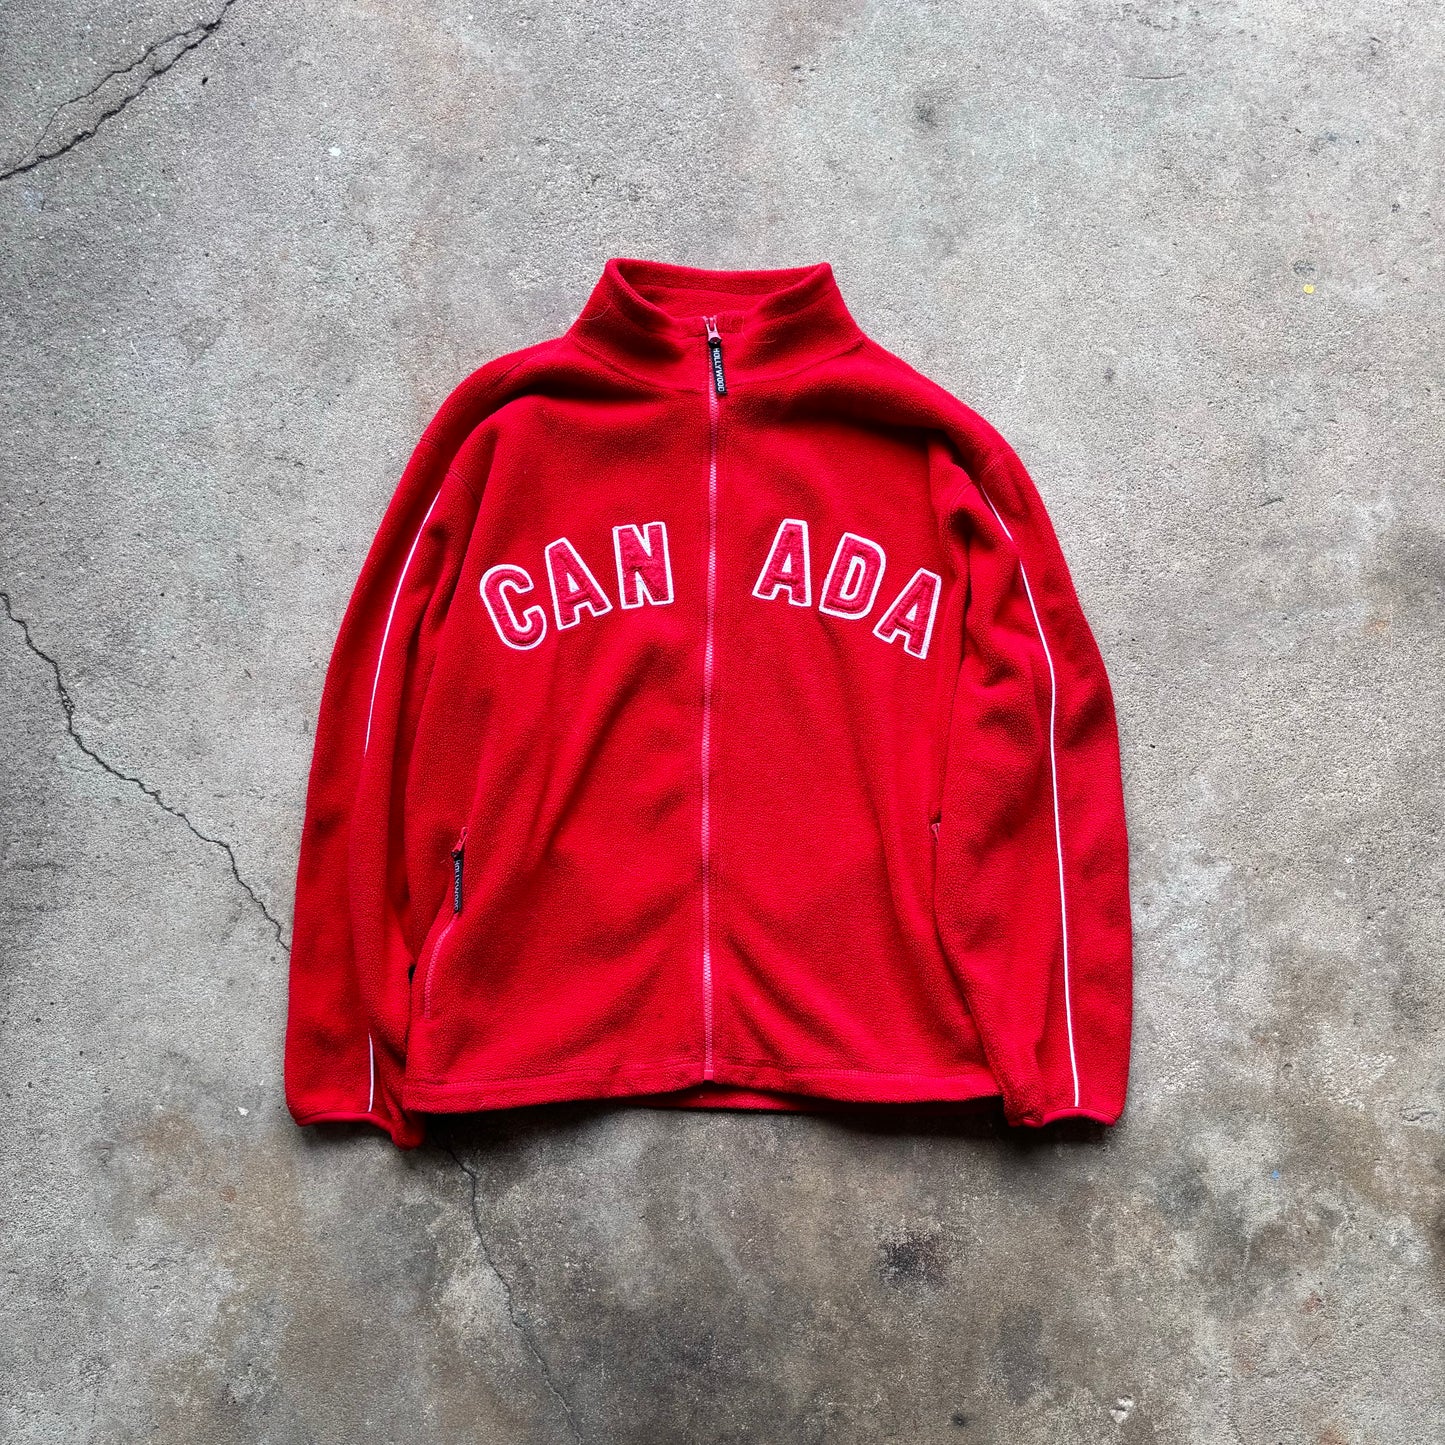 Club Hollywood Canada Red 'Canada' Zip Up Fleece [Large]